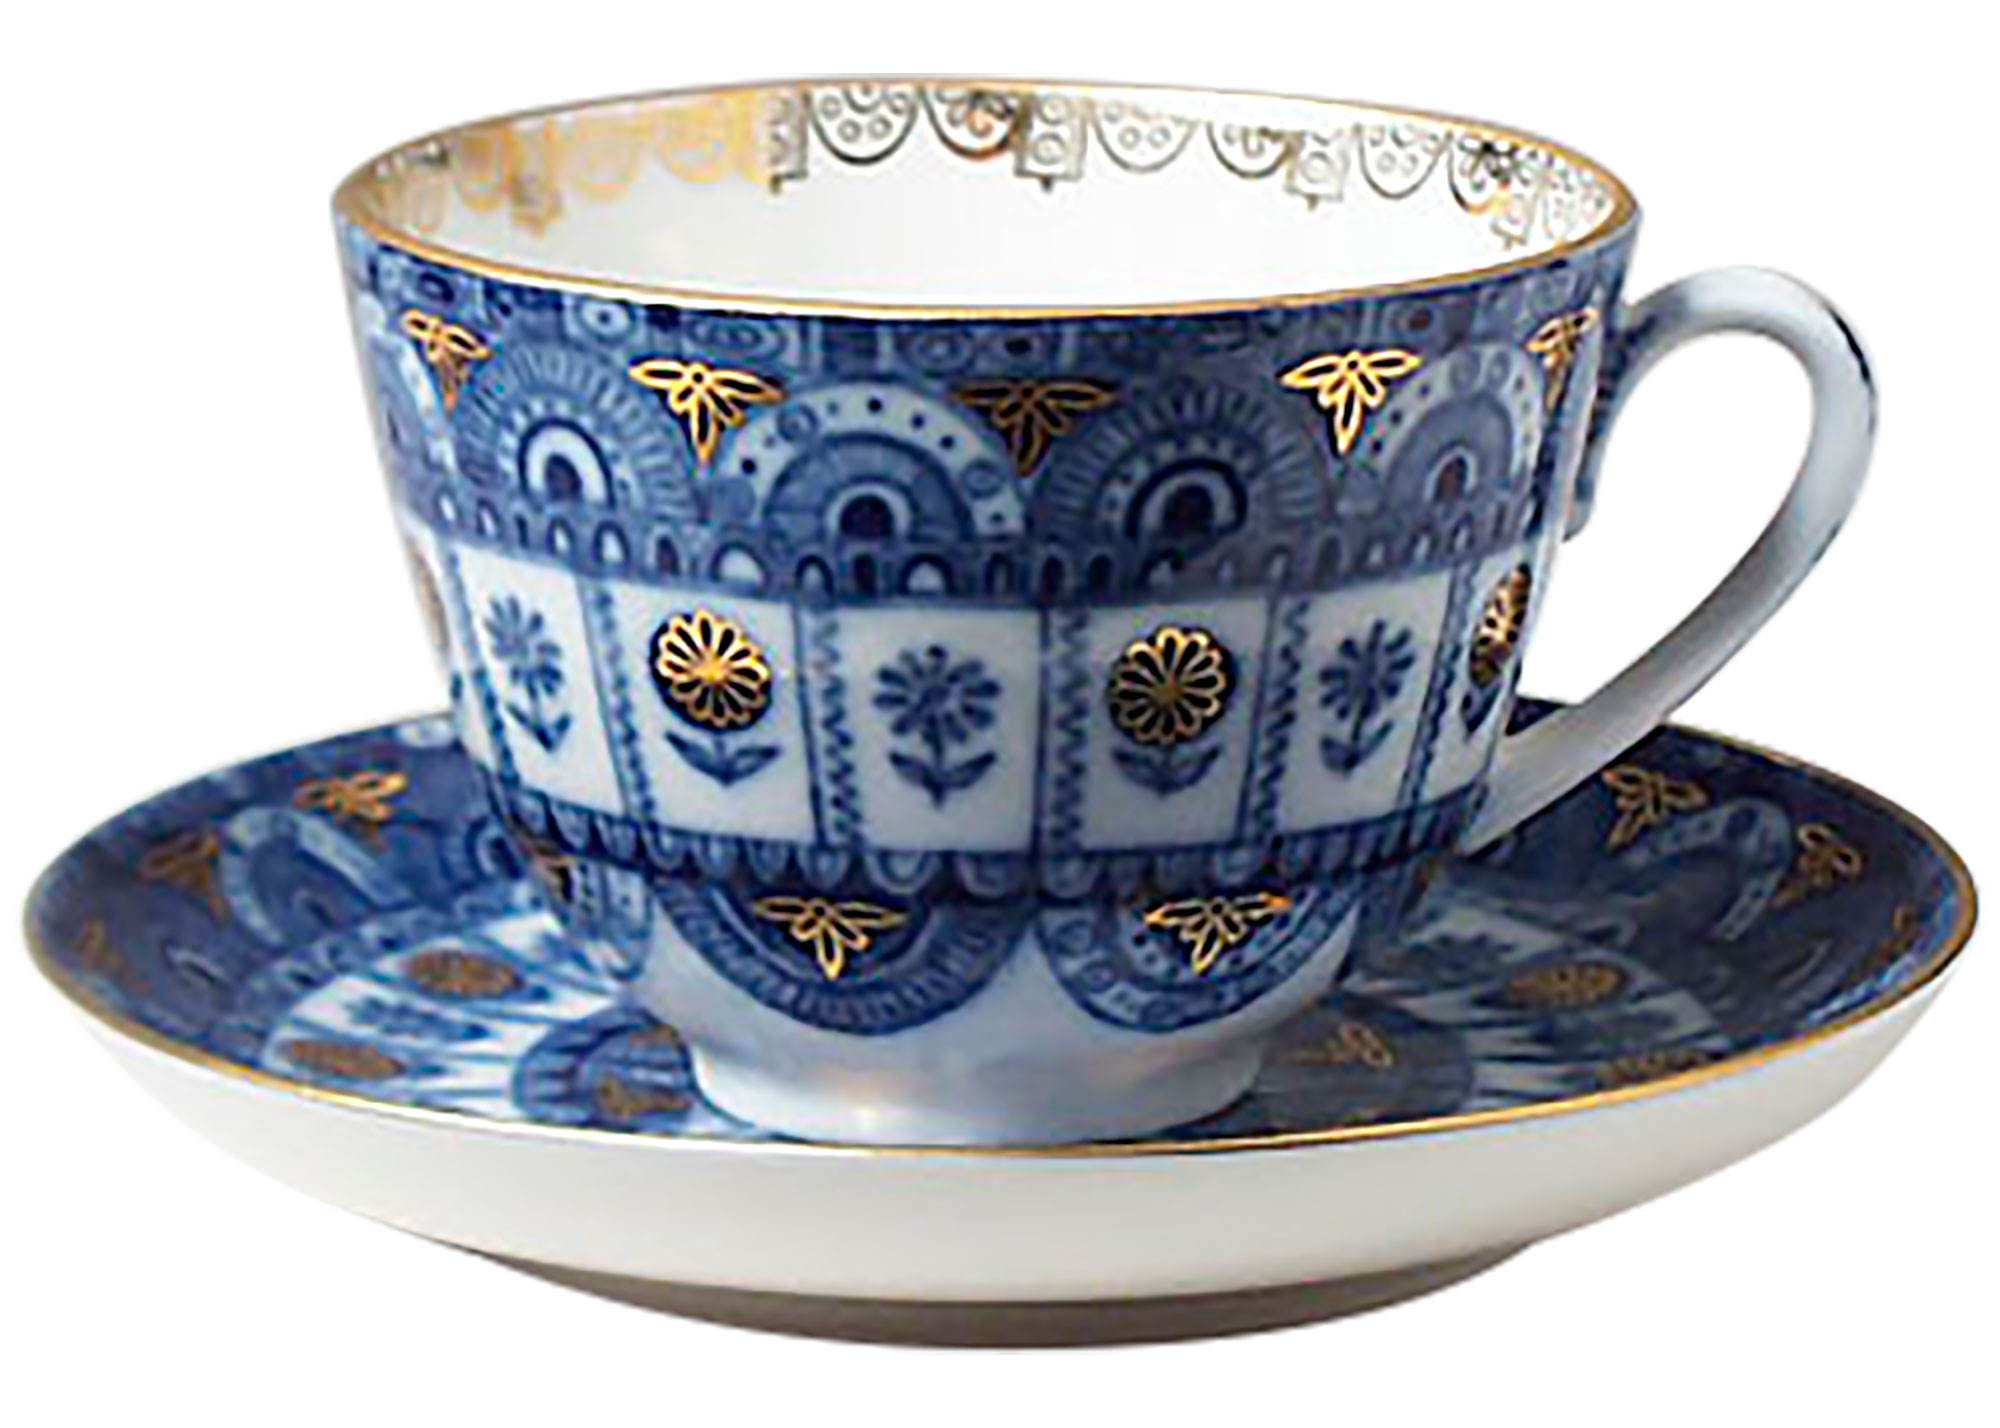 Buy Arches Tea Cup and Saucer at GoldenCockerel.com